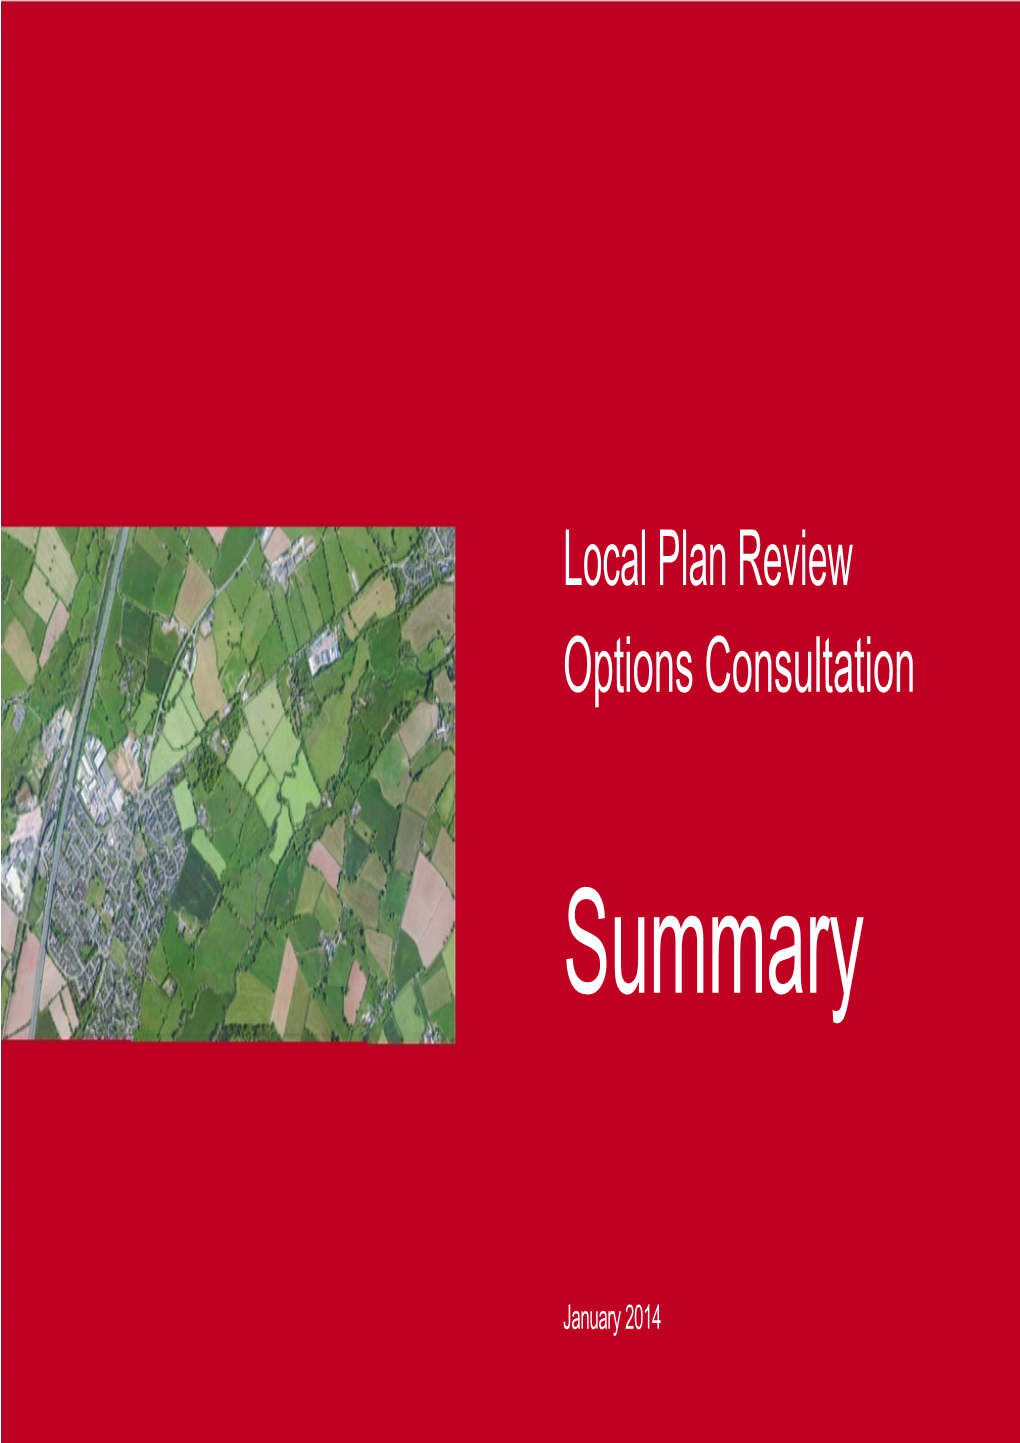 Local Plan Review Options Consultation